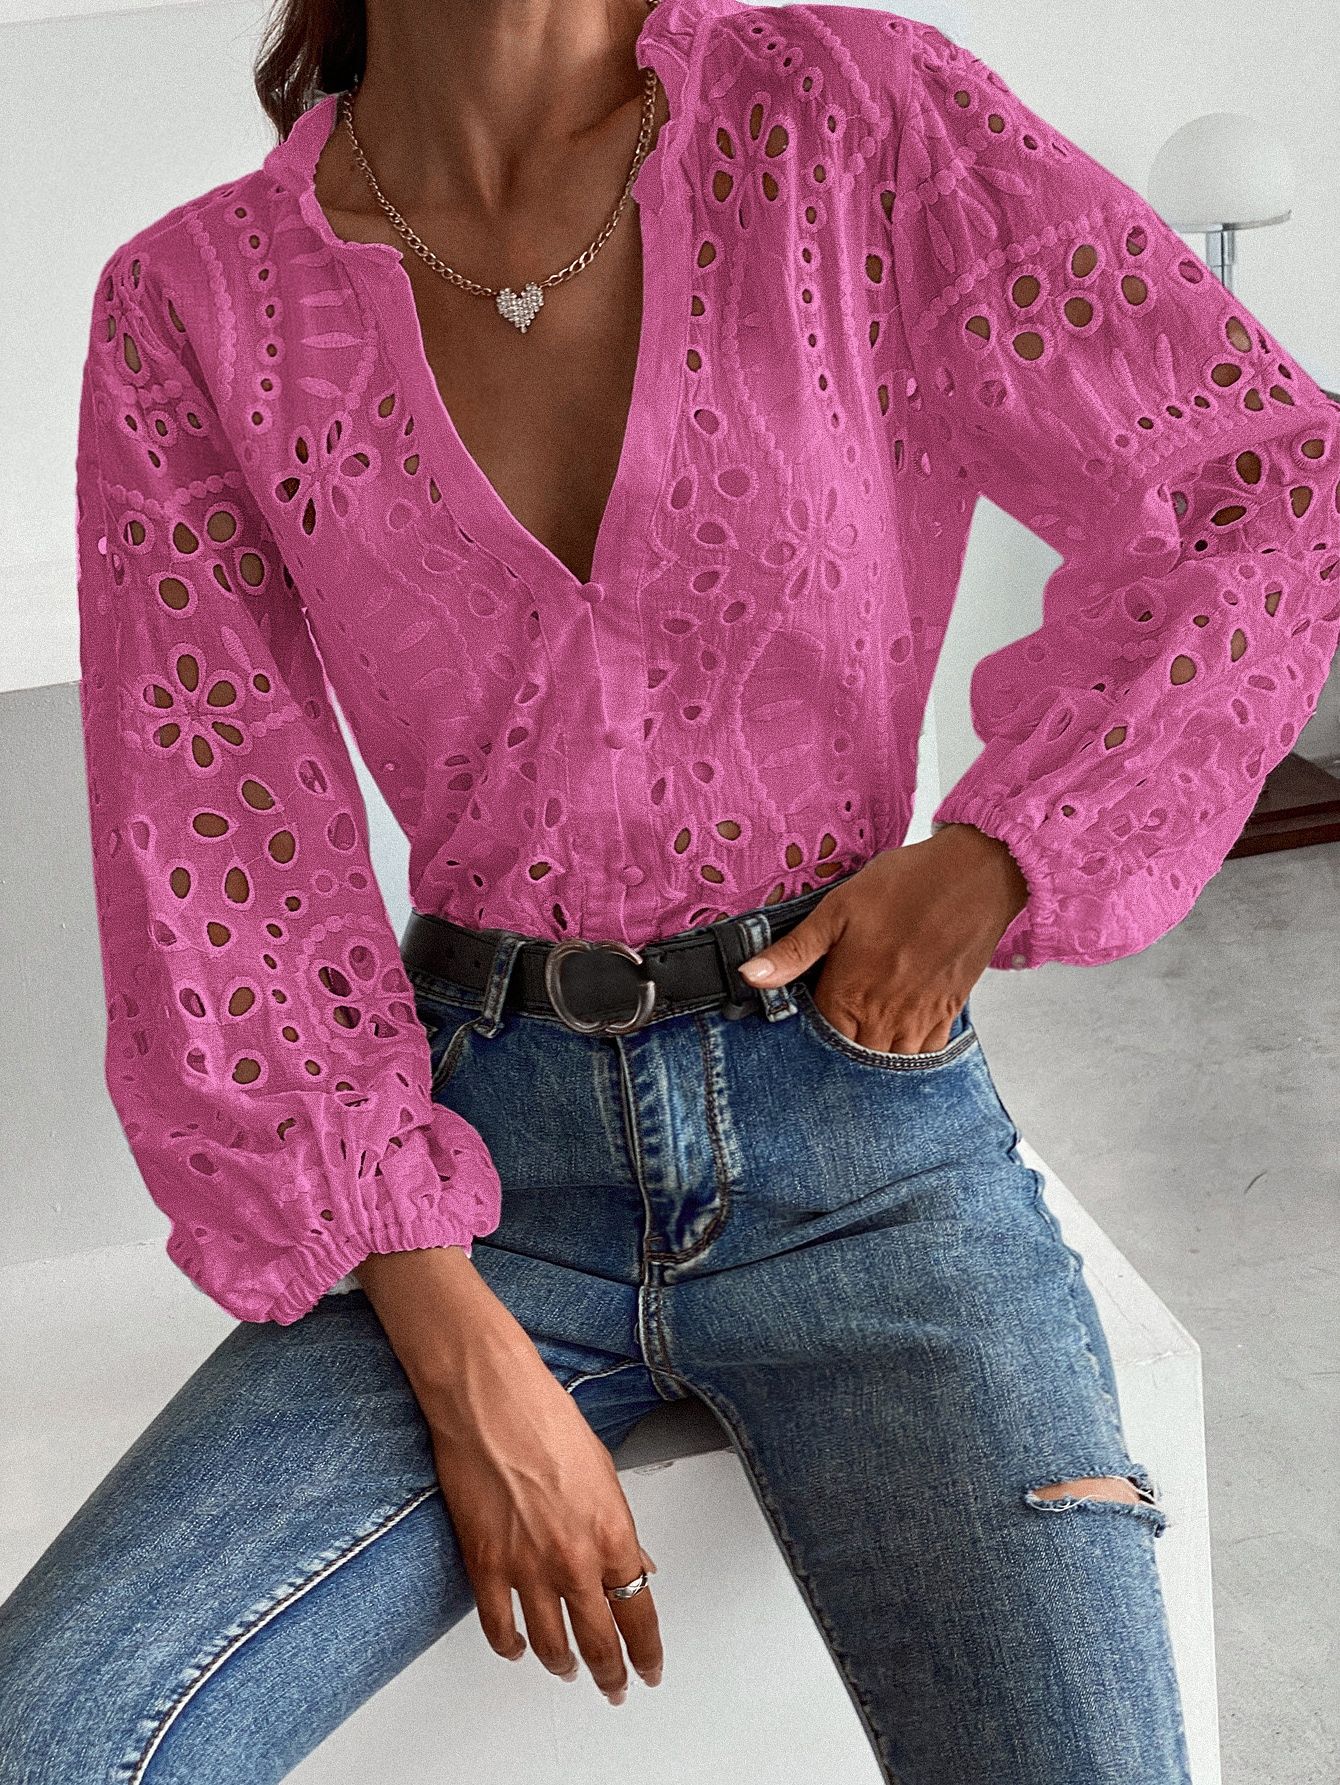 How to Style Hot Pink Blouse: 15 Stunning Outfit Ideas for Ladies